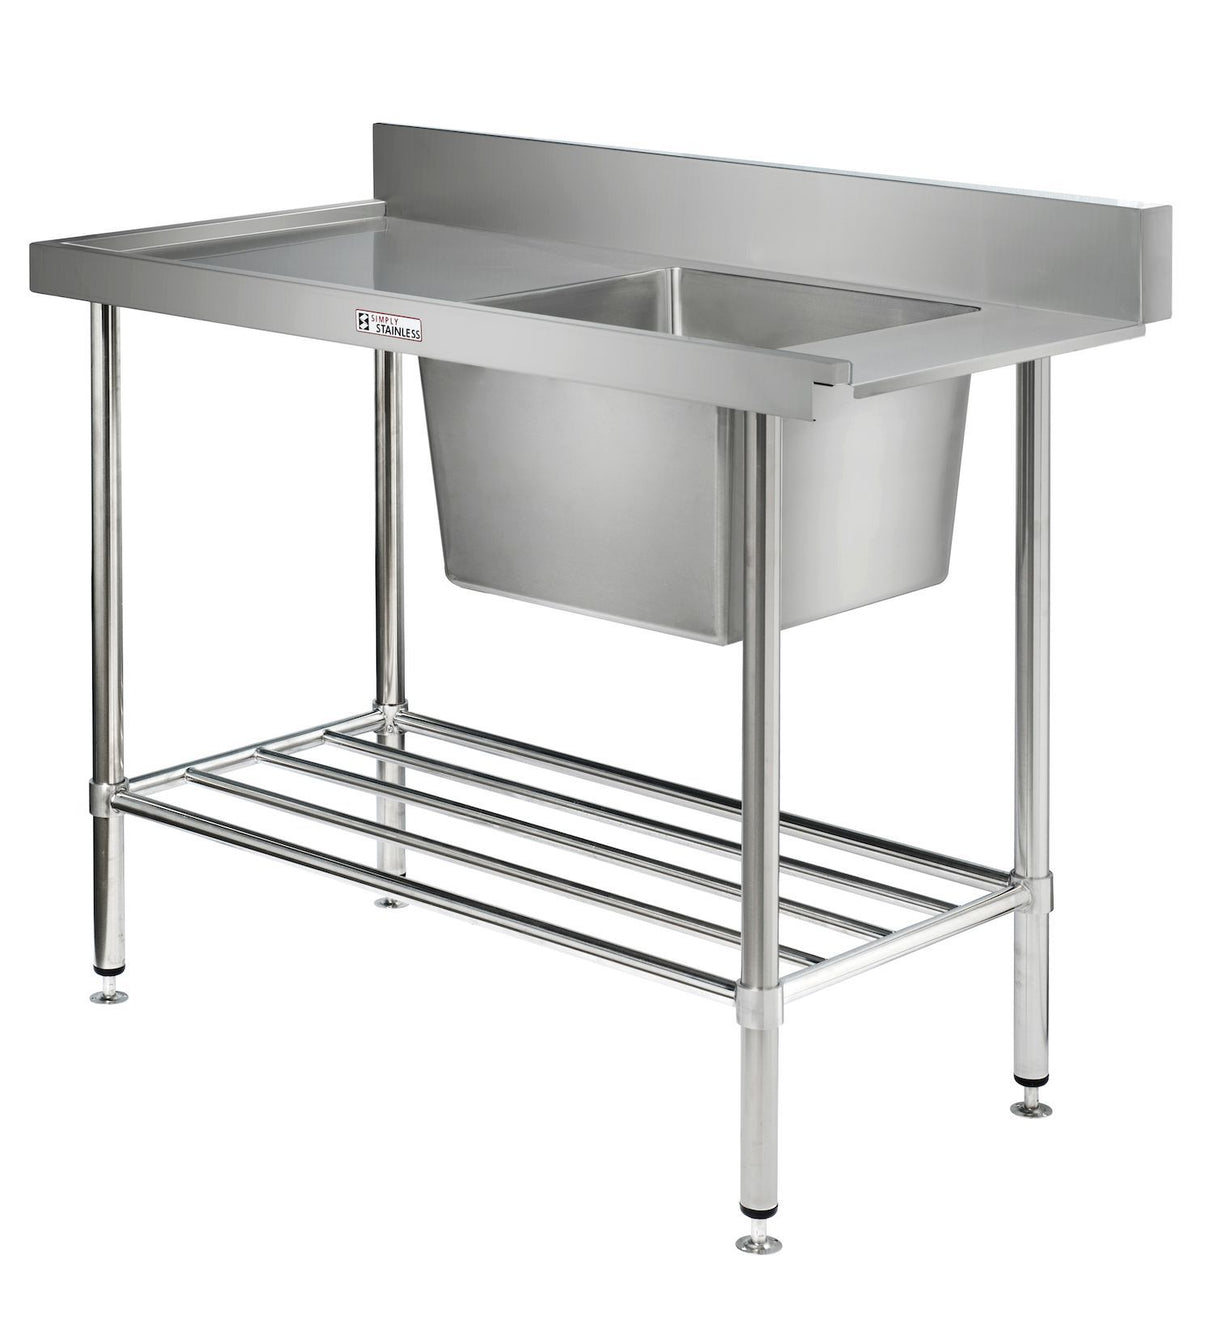 Simply Stainless Dishwash Table & Sink - SS081200L